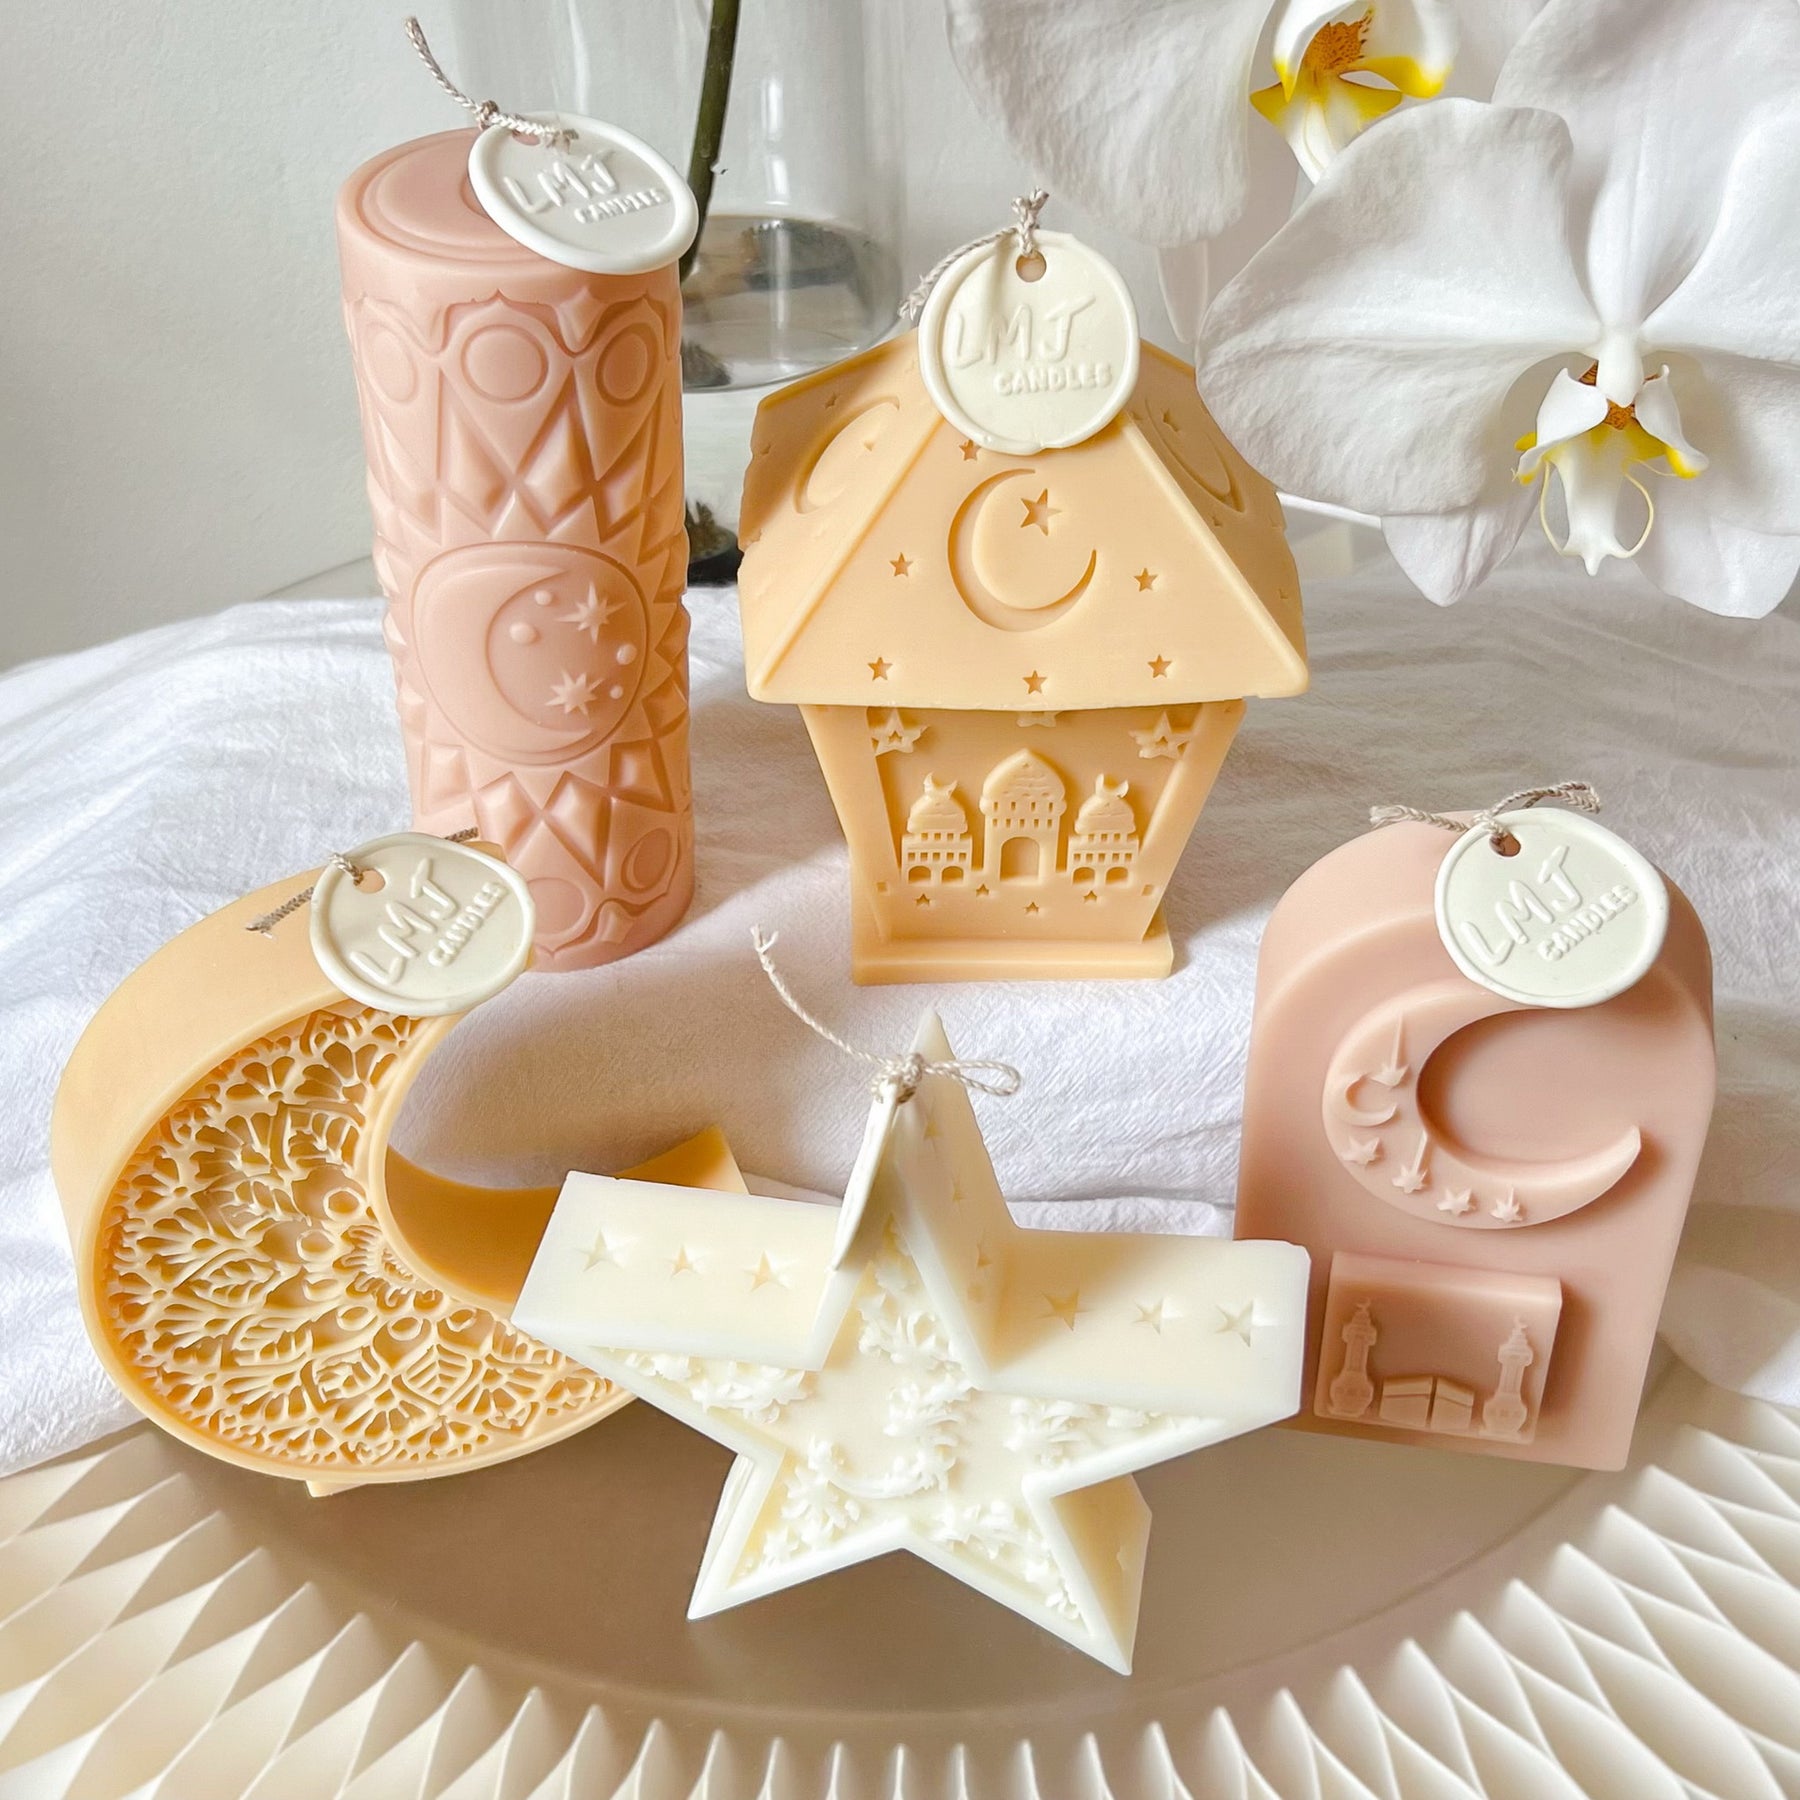 Moon Shaped Ramadan Candle - Eid Décor & Gifts | LMJ Candles